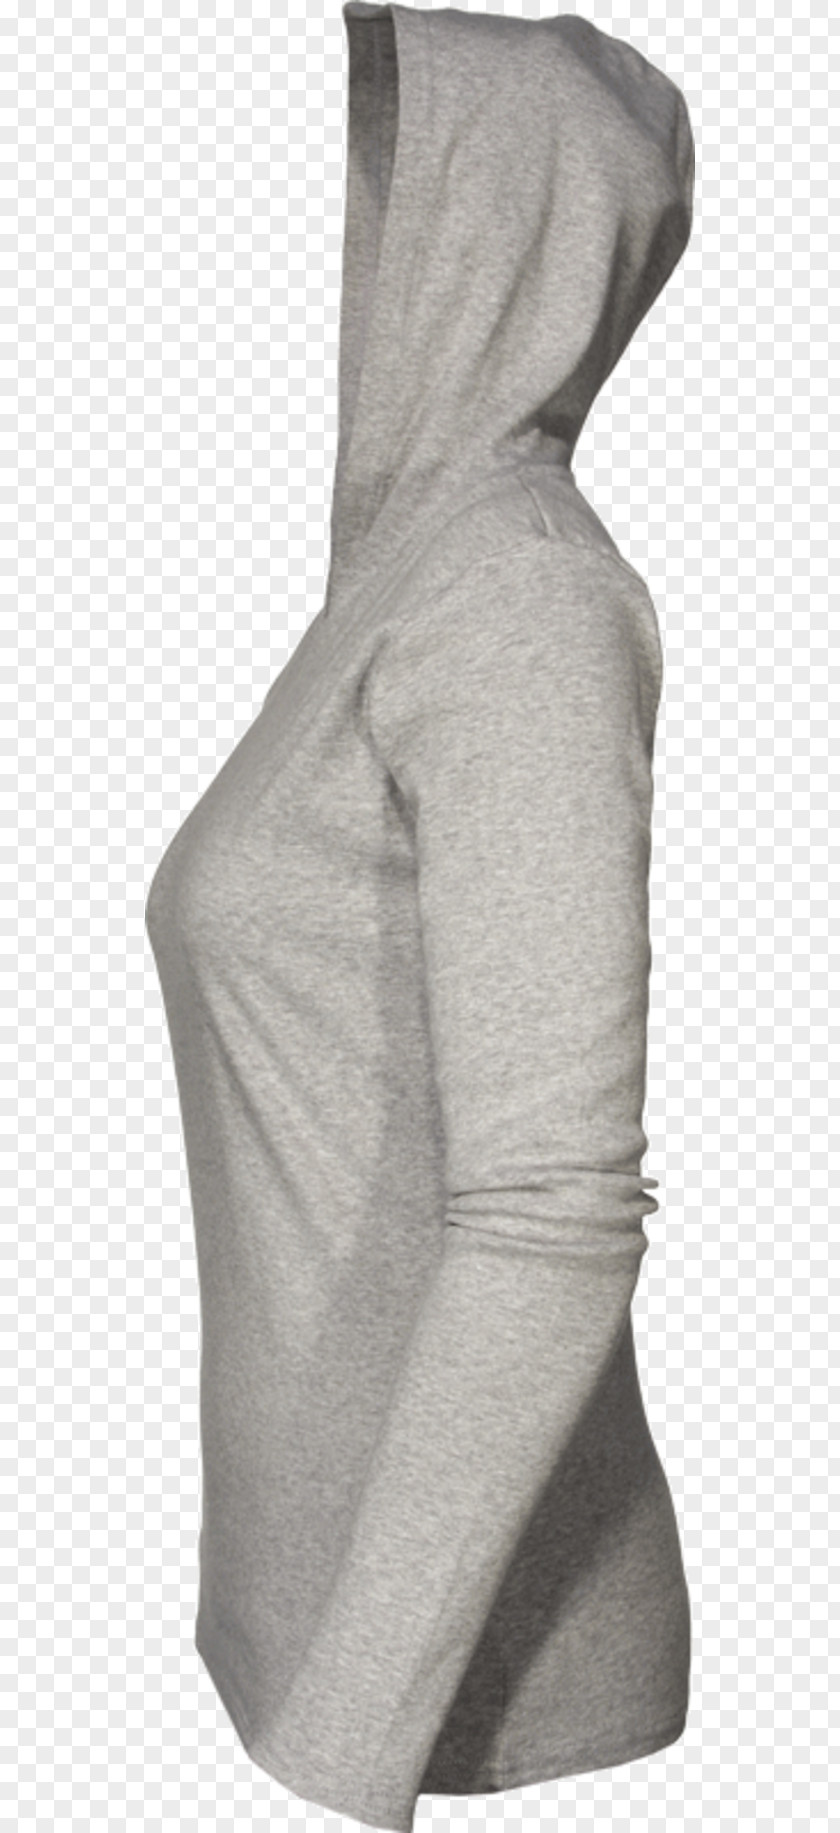 Sidesup Hoodie Shoulder Sleeve Fashion Stretch Fabric PNG